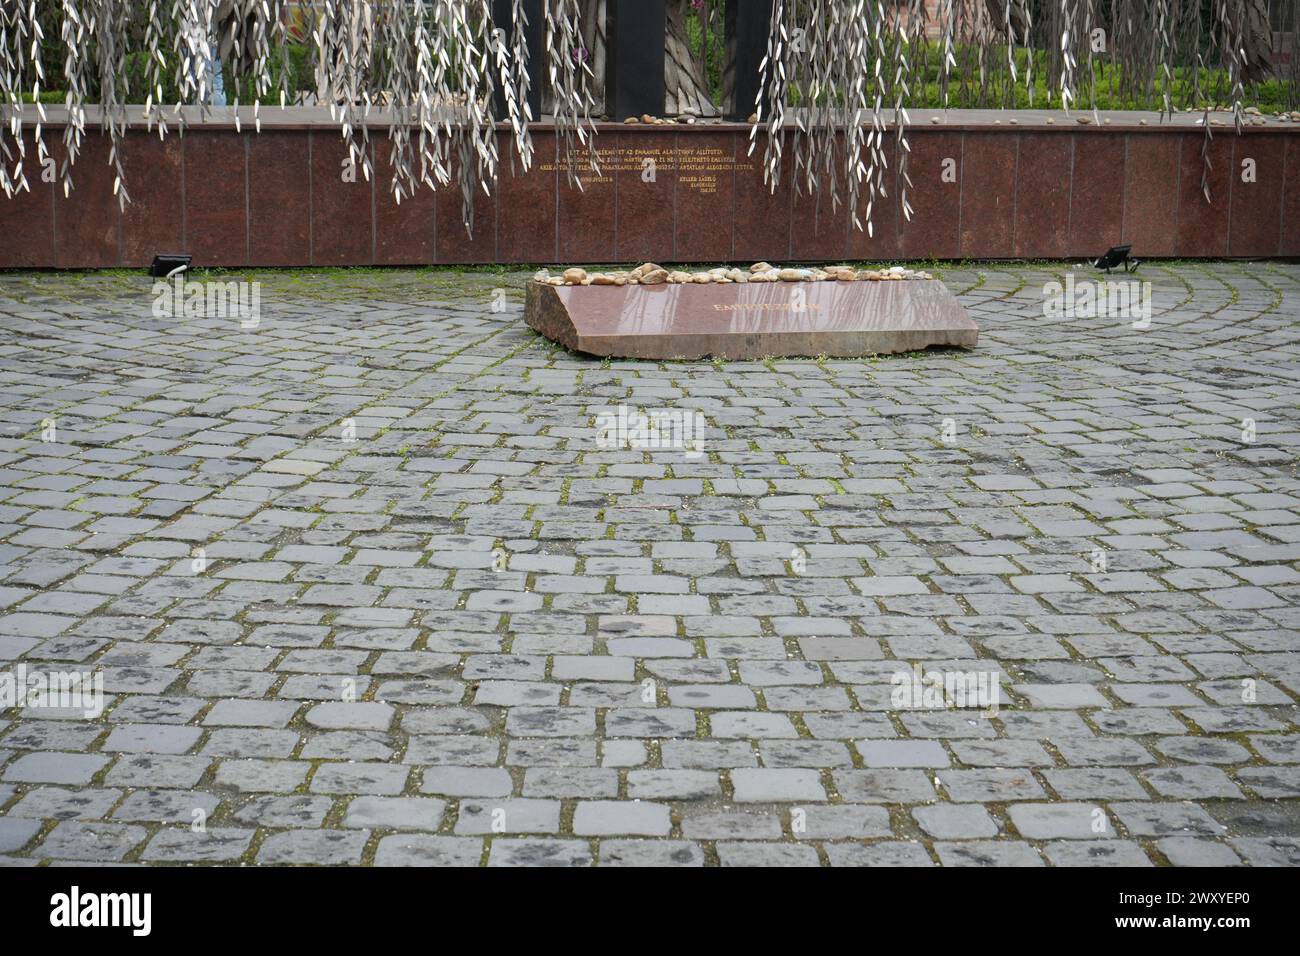 The Memorial of the Hungarian Jewish Martyrs in the Raoul Wallenberg Holocaust Memorial Park at Dohány Street Synagogue. Stock Photo